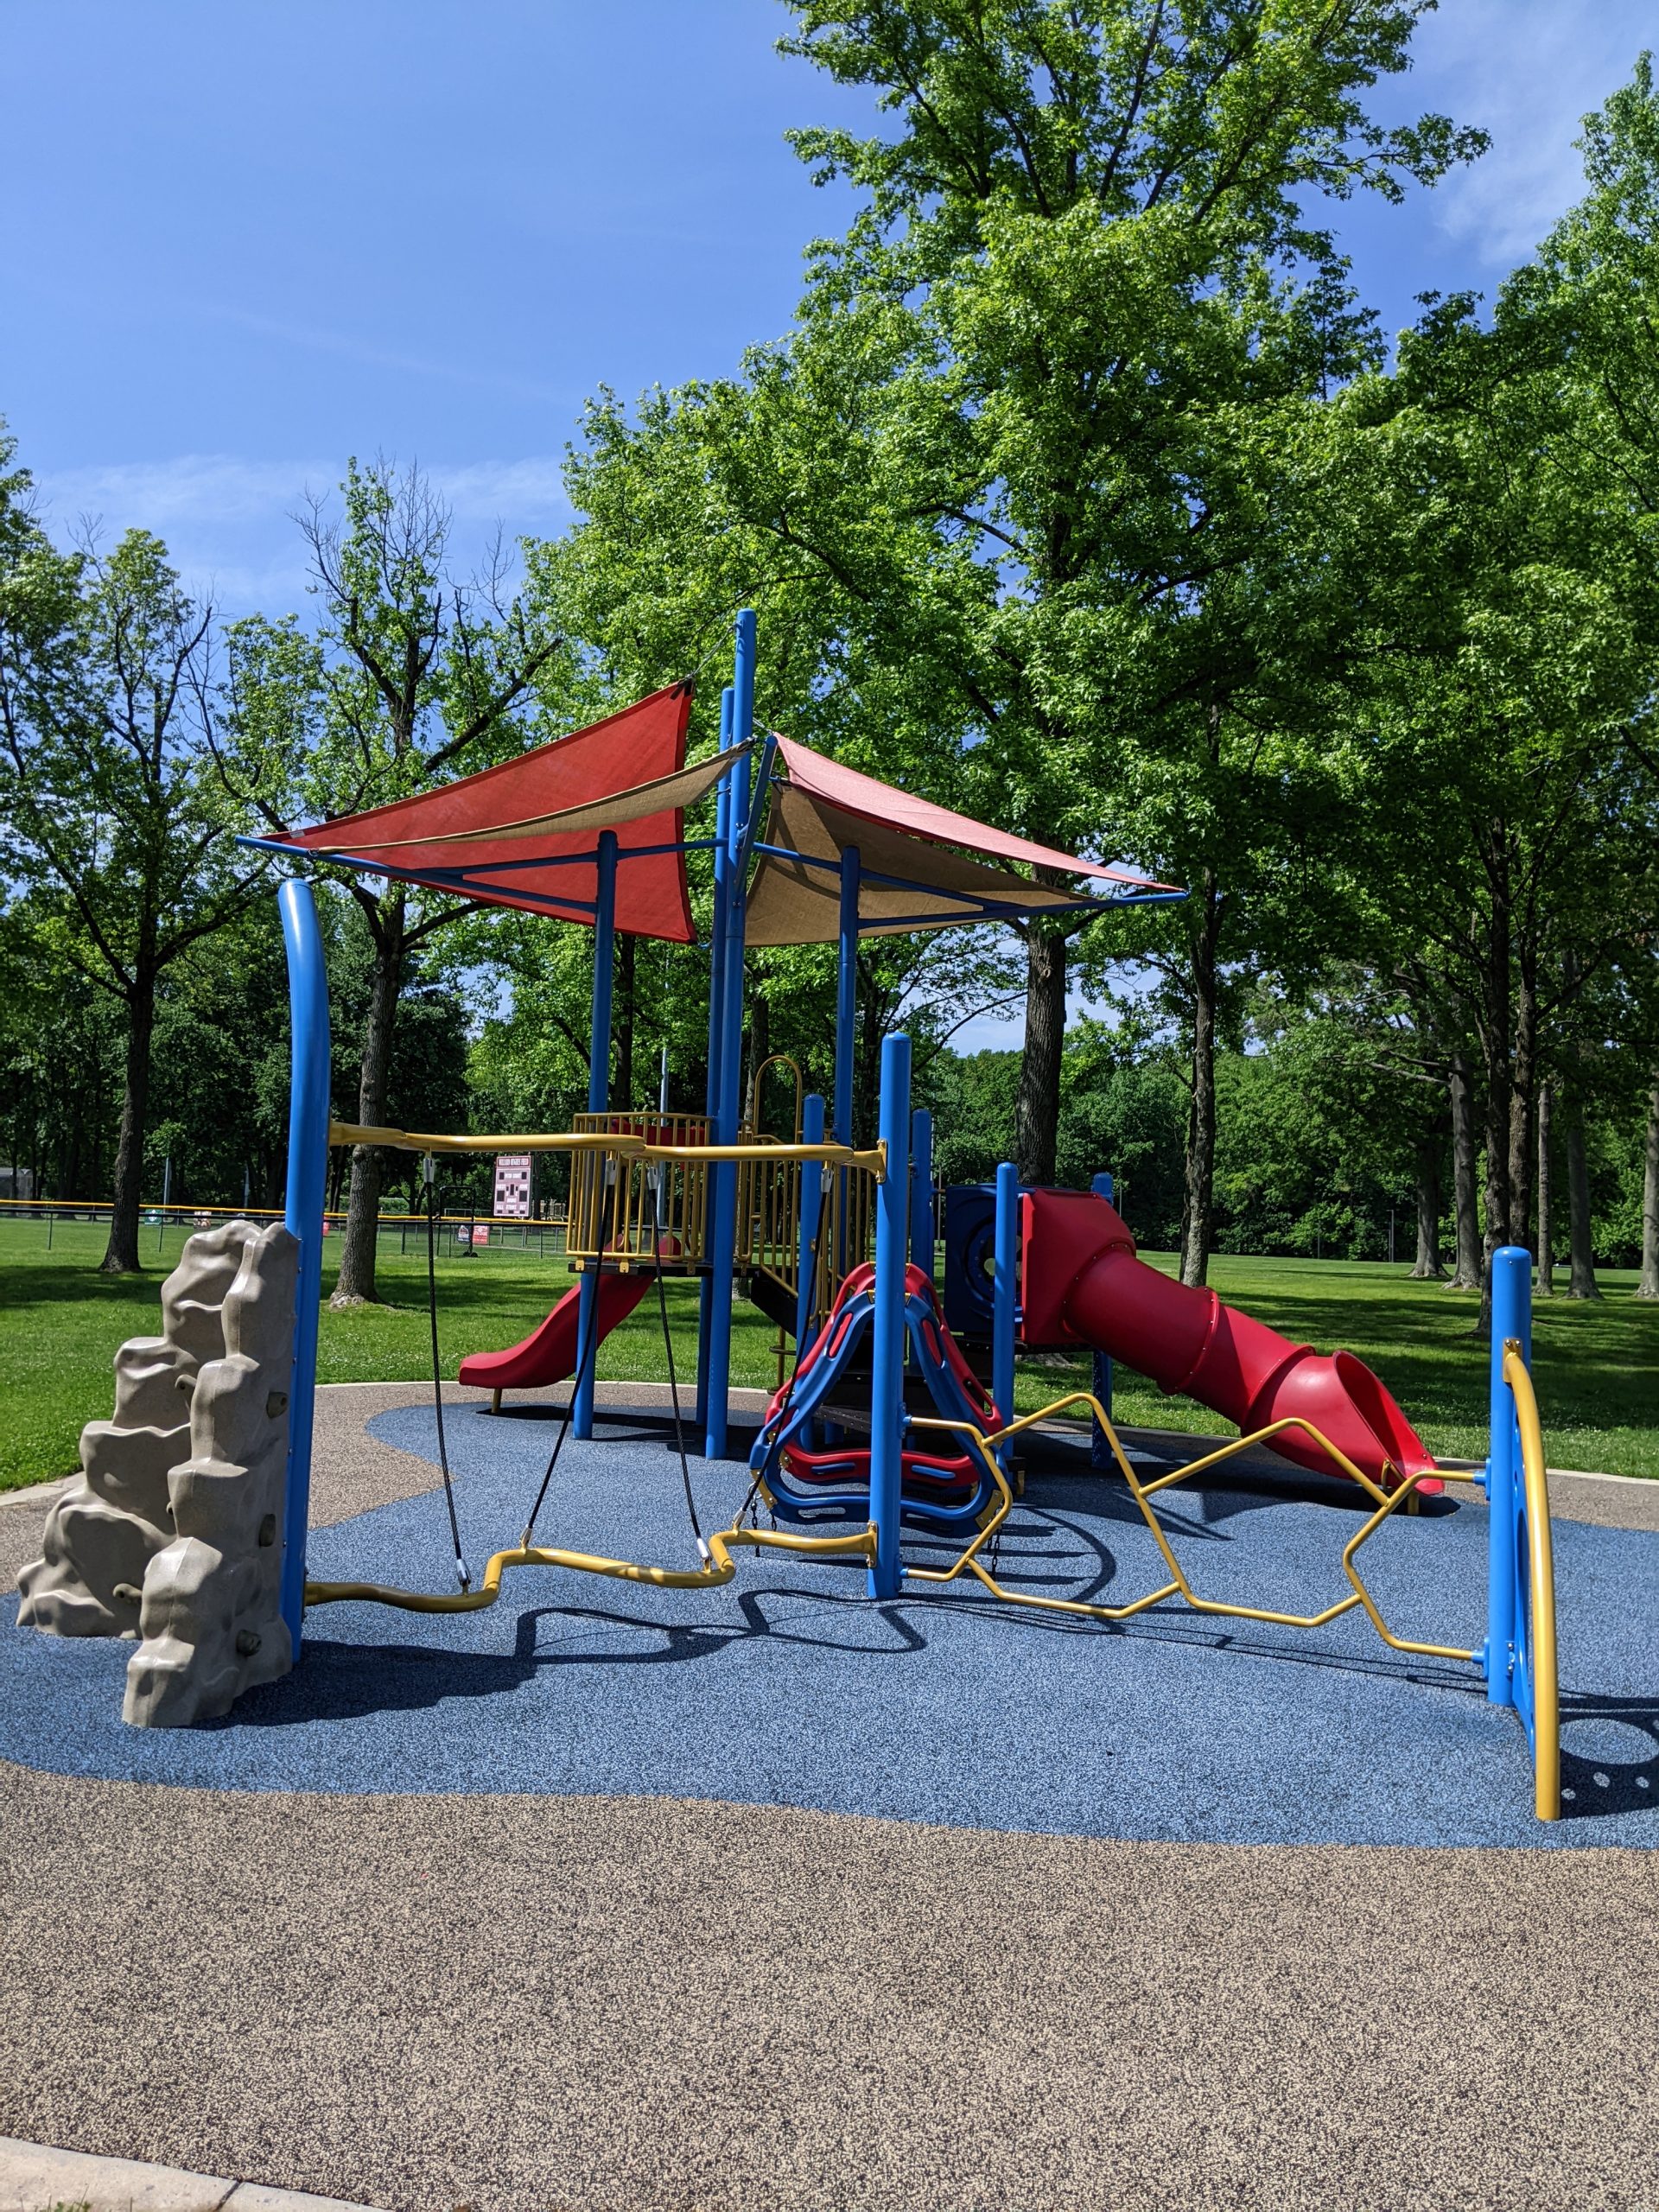 Central Park Playground in Lawrenceville NJ toddler and preschooler playground SpecialFeatures(1)